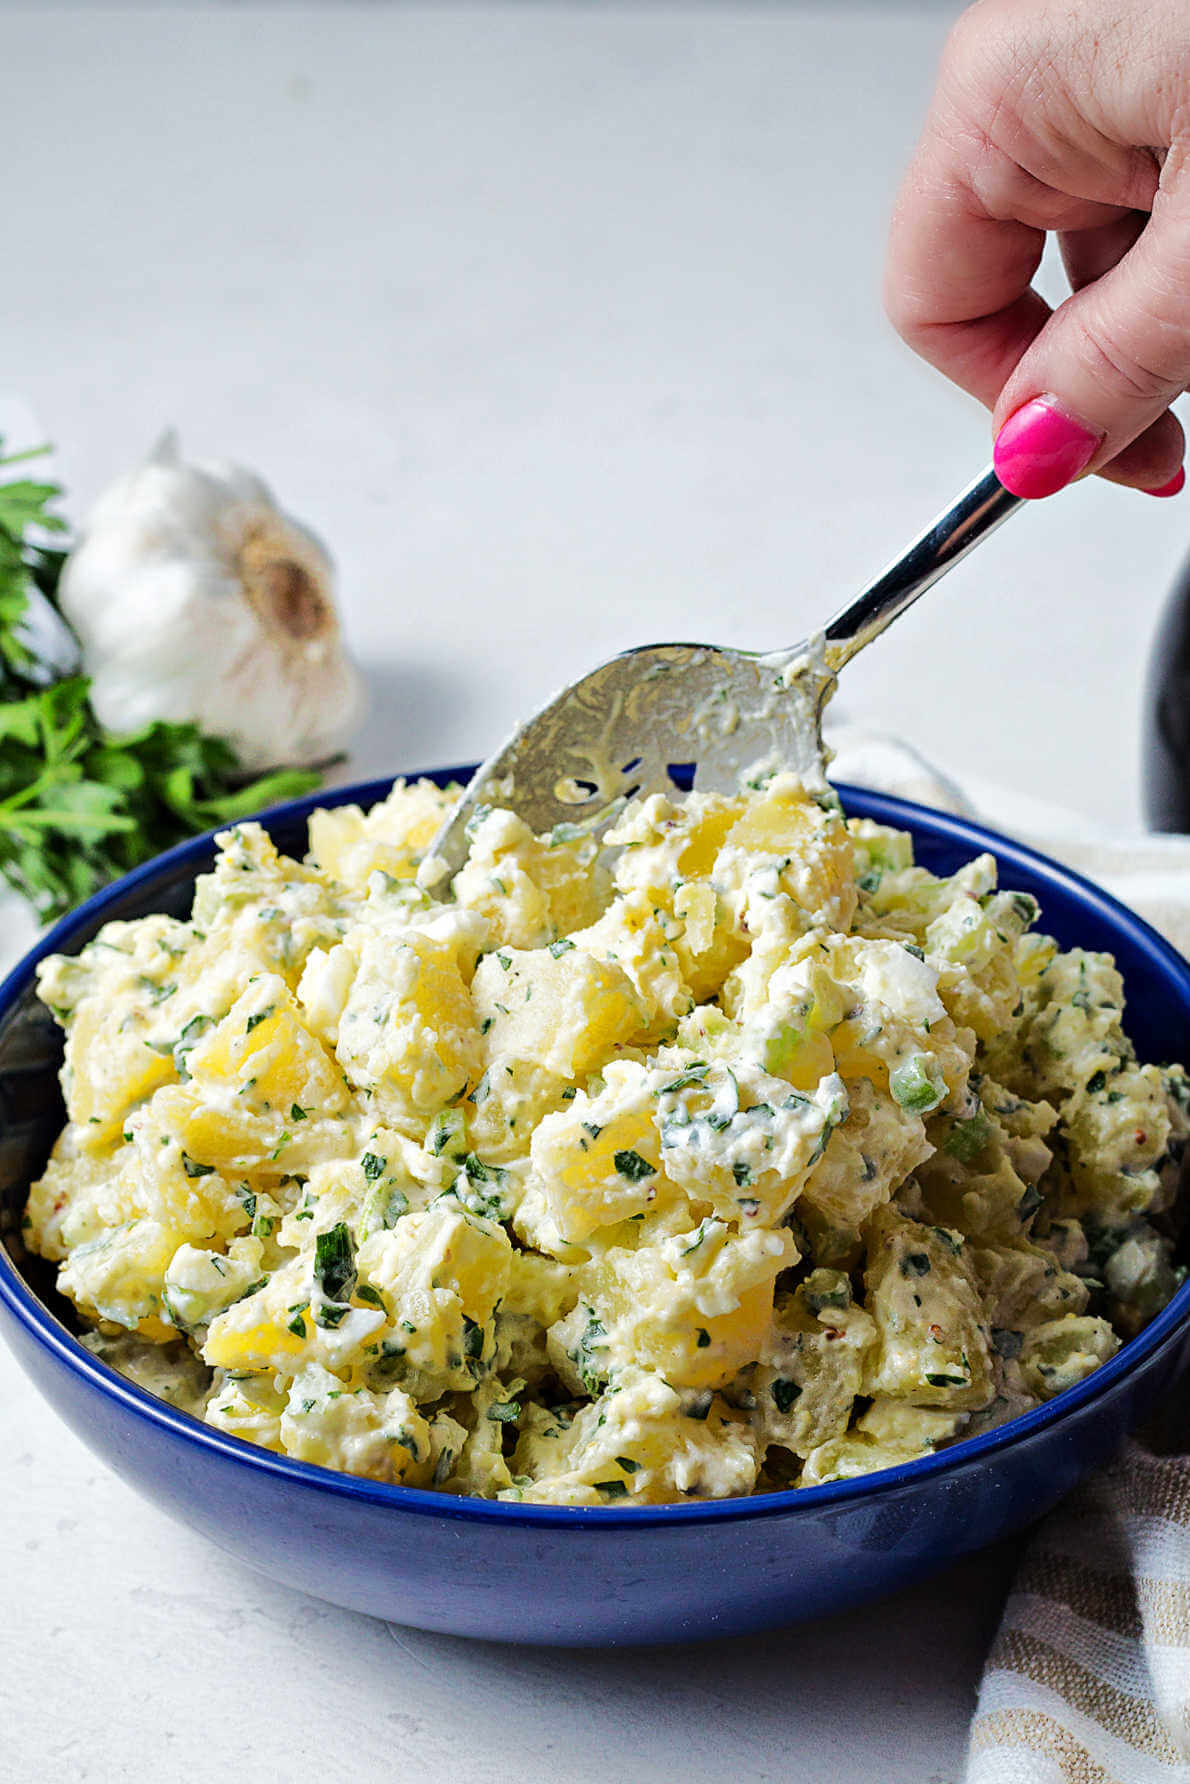 spooning potato salad into a blue serving bowl on a table.